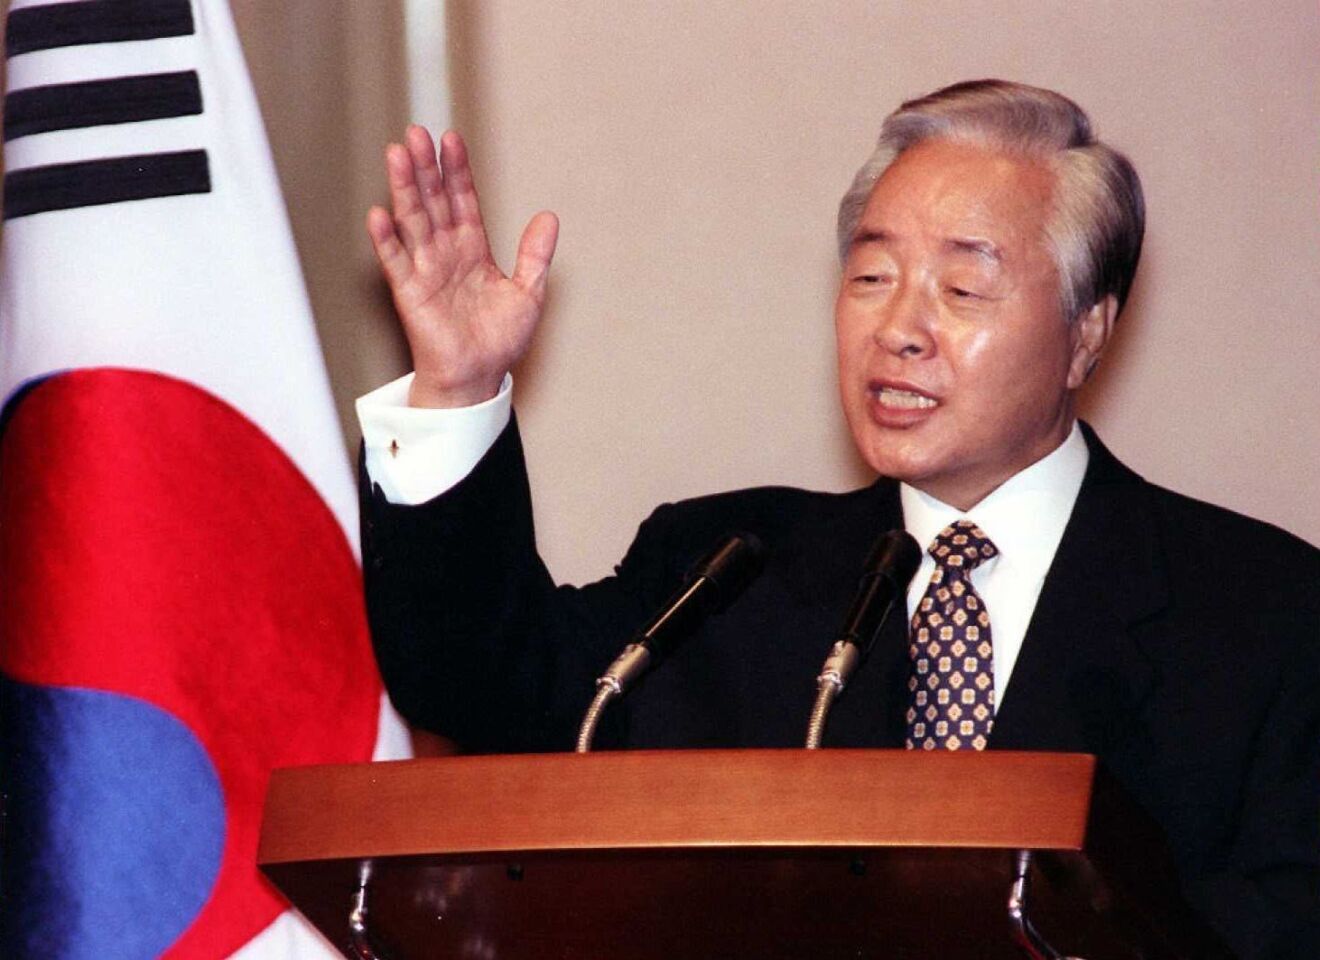 The former South Korean president formally ended decades of military rule and accepted a massive international bailout during the 1997-98 Asian financial crisis. He was 87. Full obituary